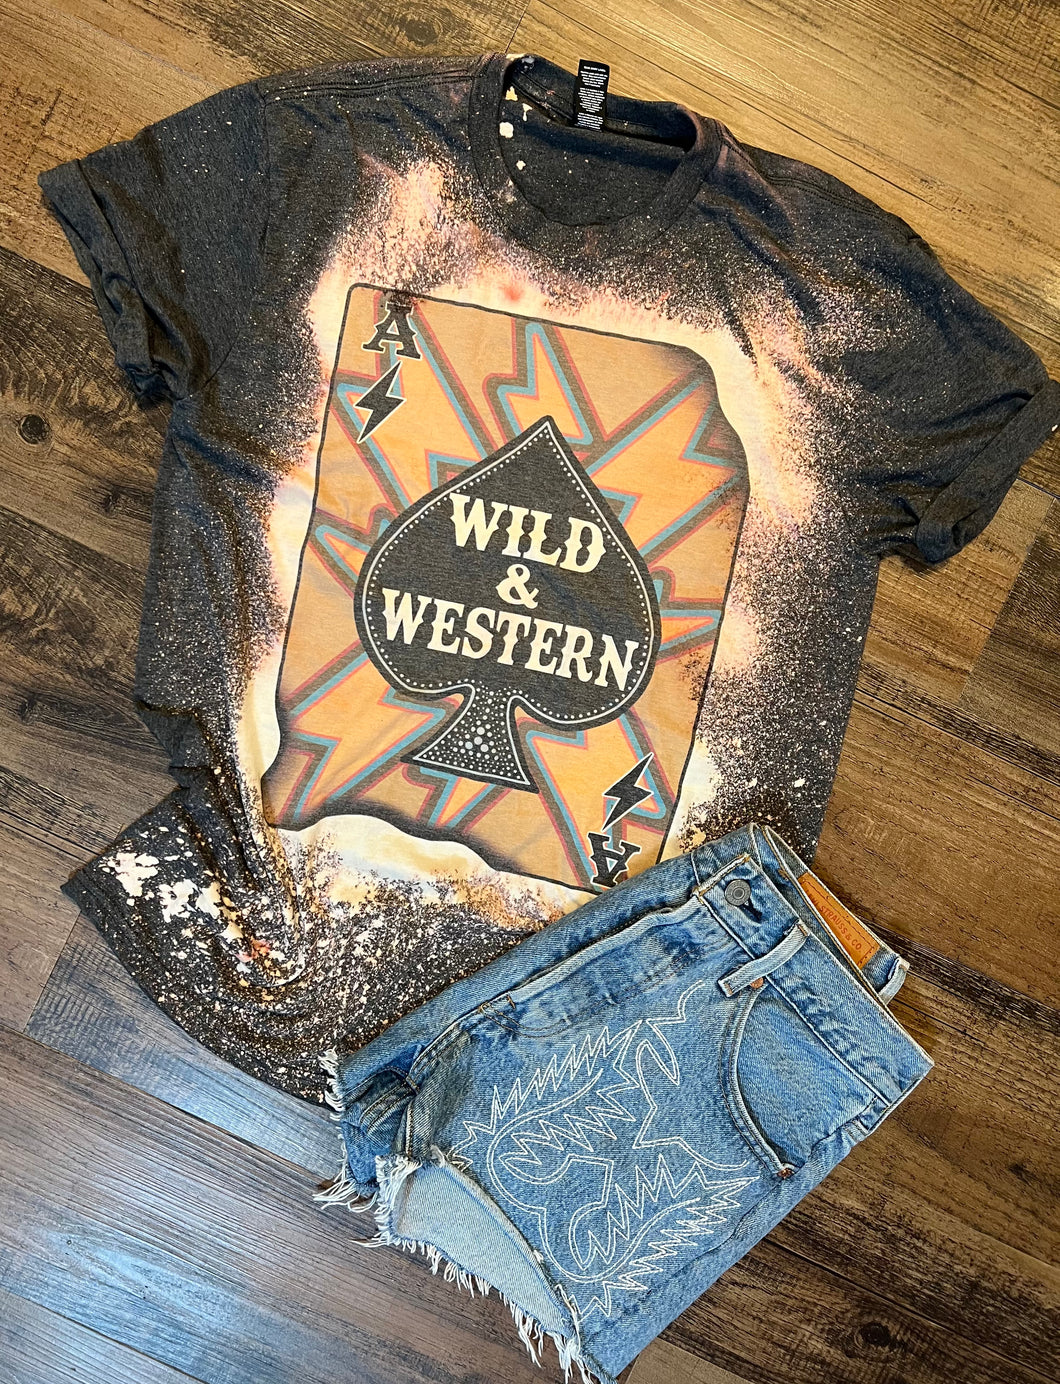 Wild and western bleached graphic tee - Mavictoria Designs Hot Press Express